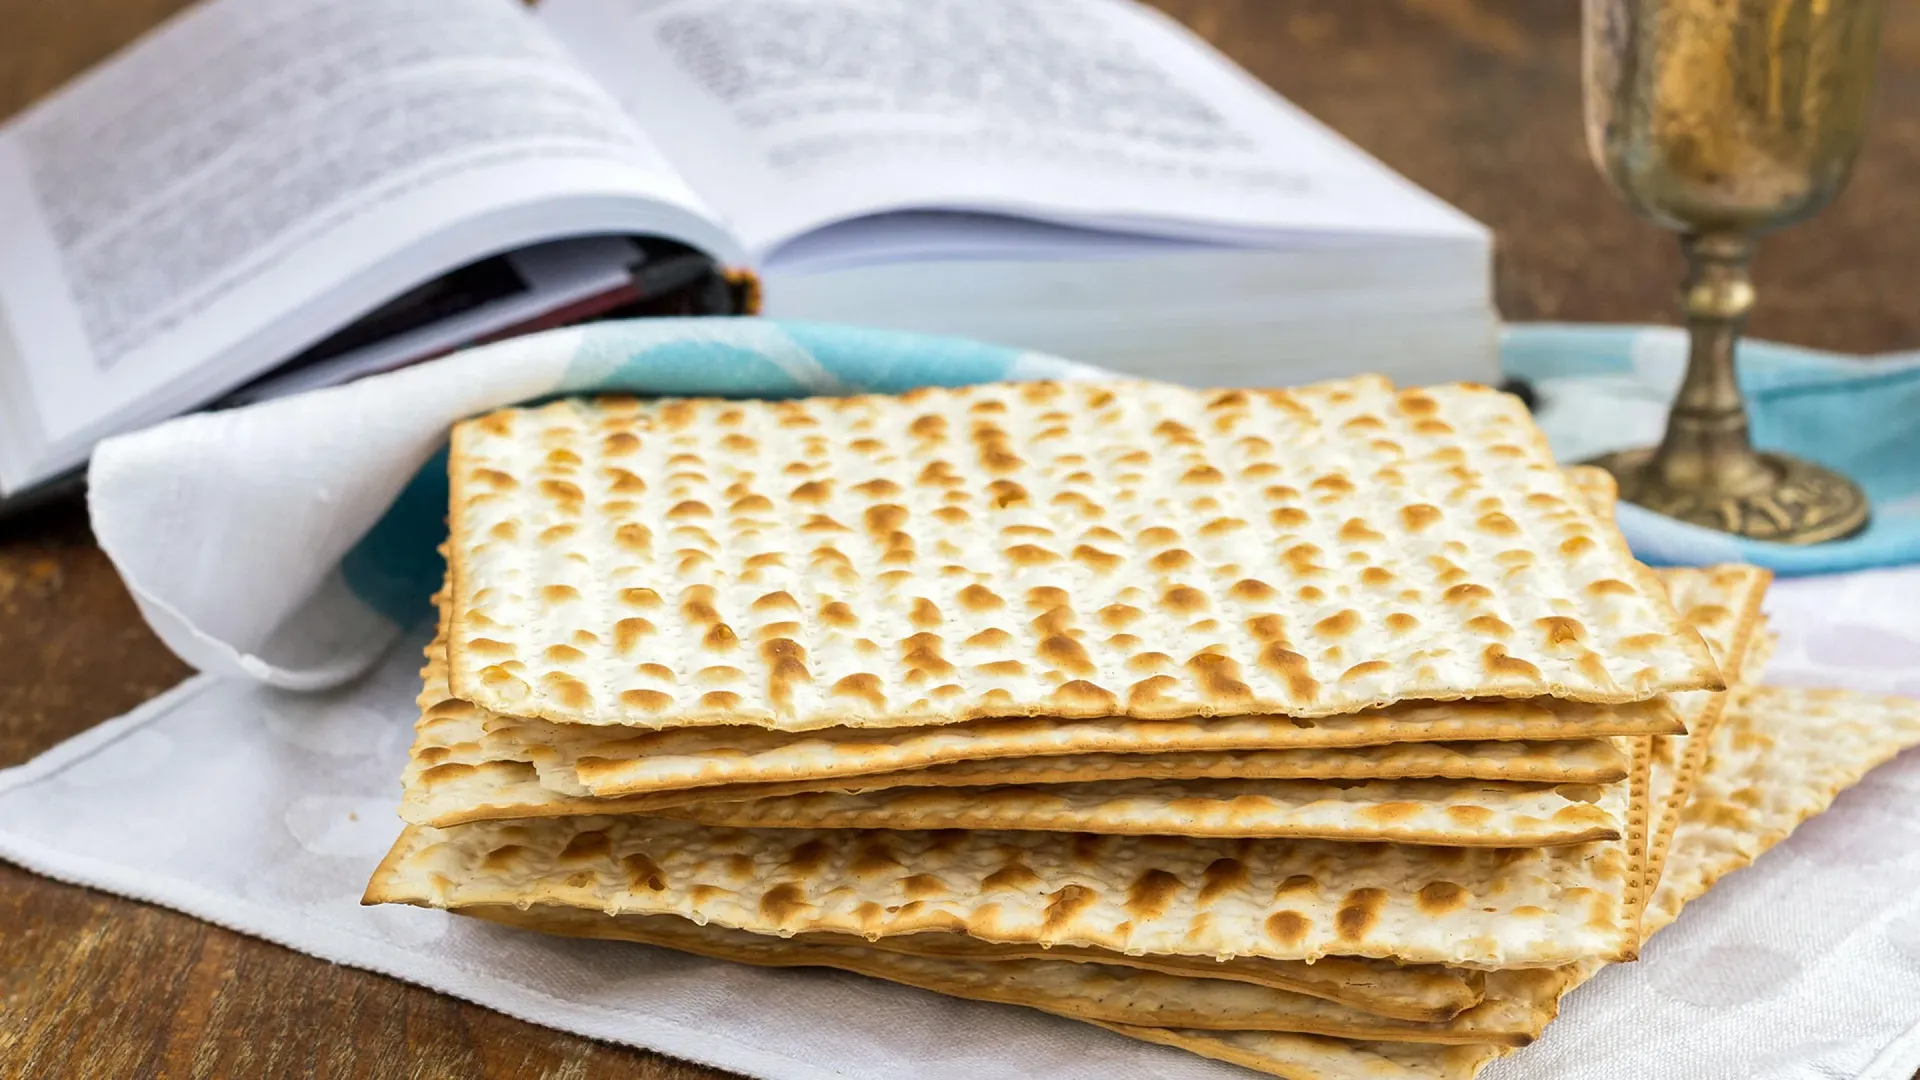 Passover: The Feast of Unleavened Bread